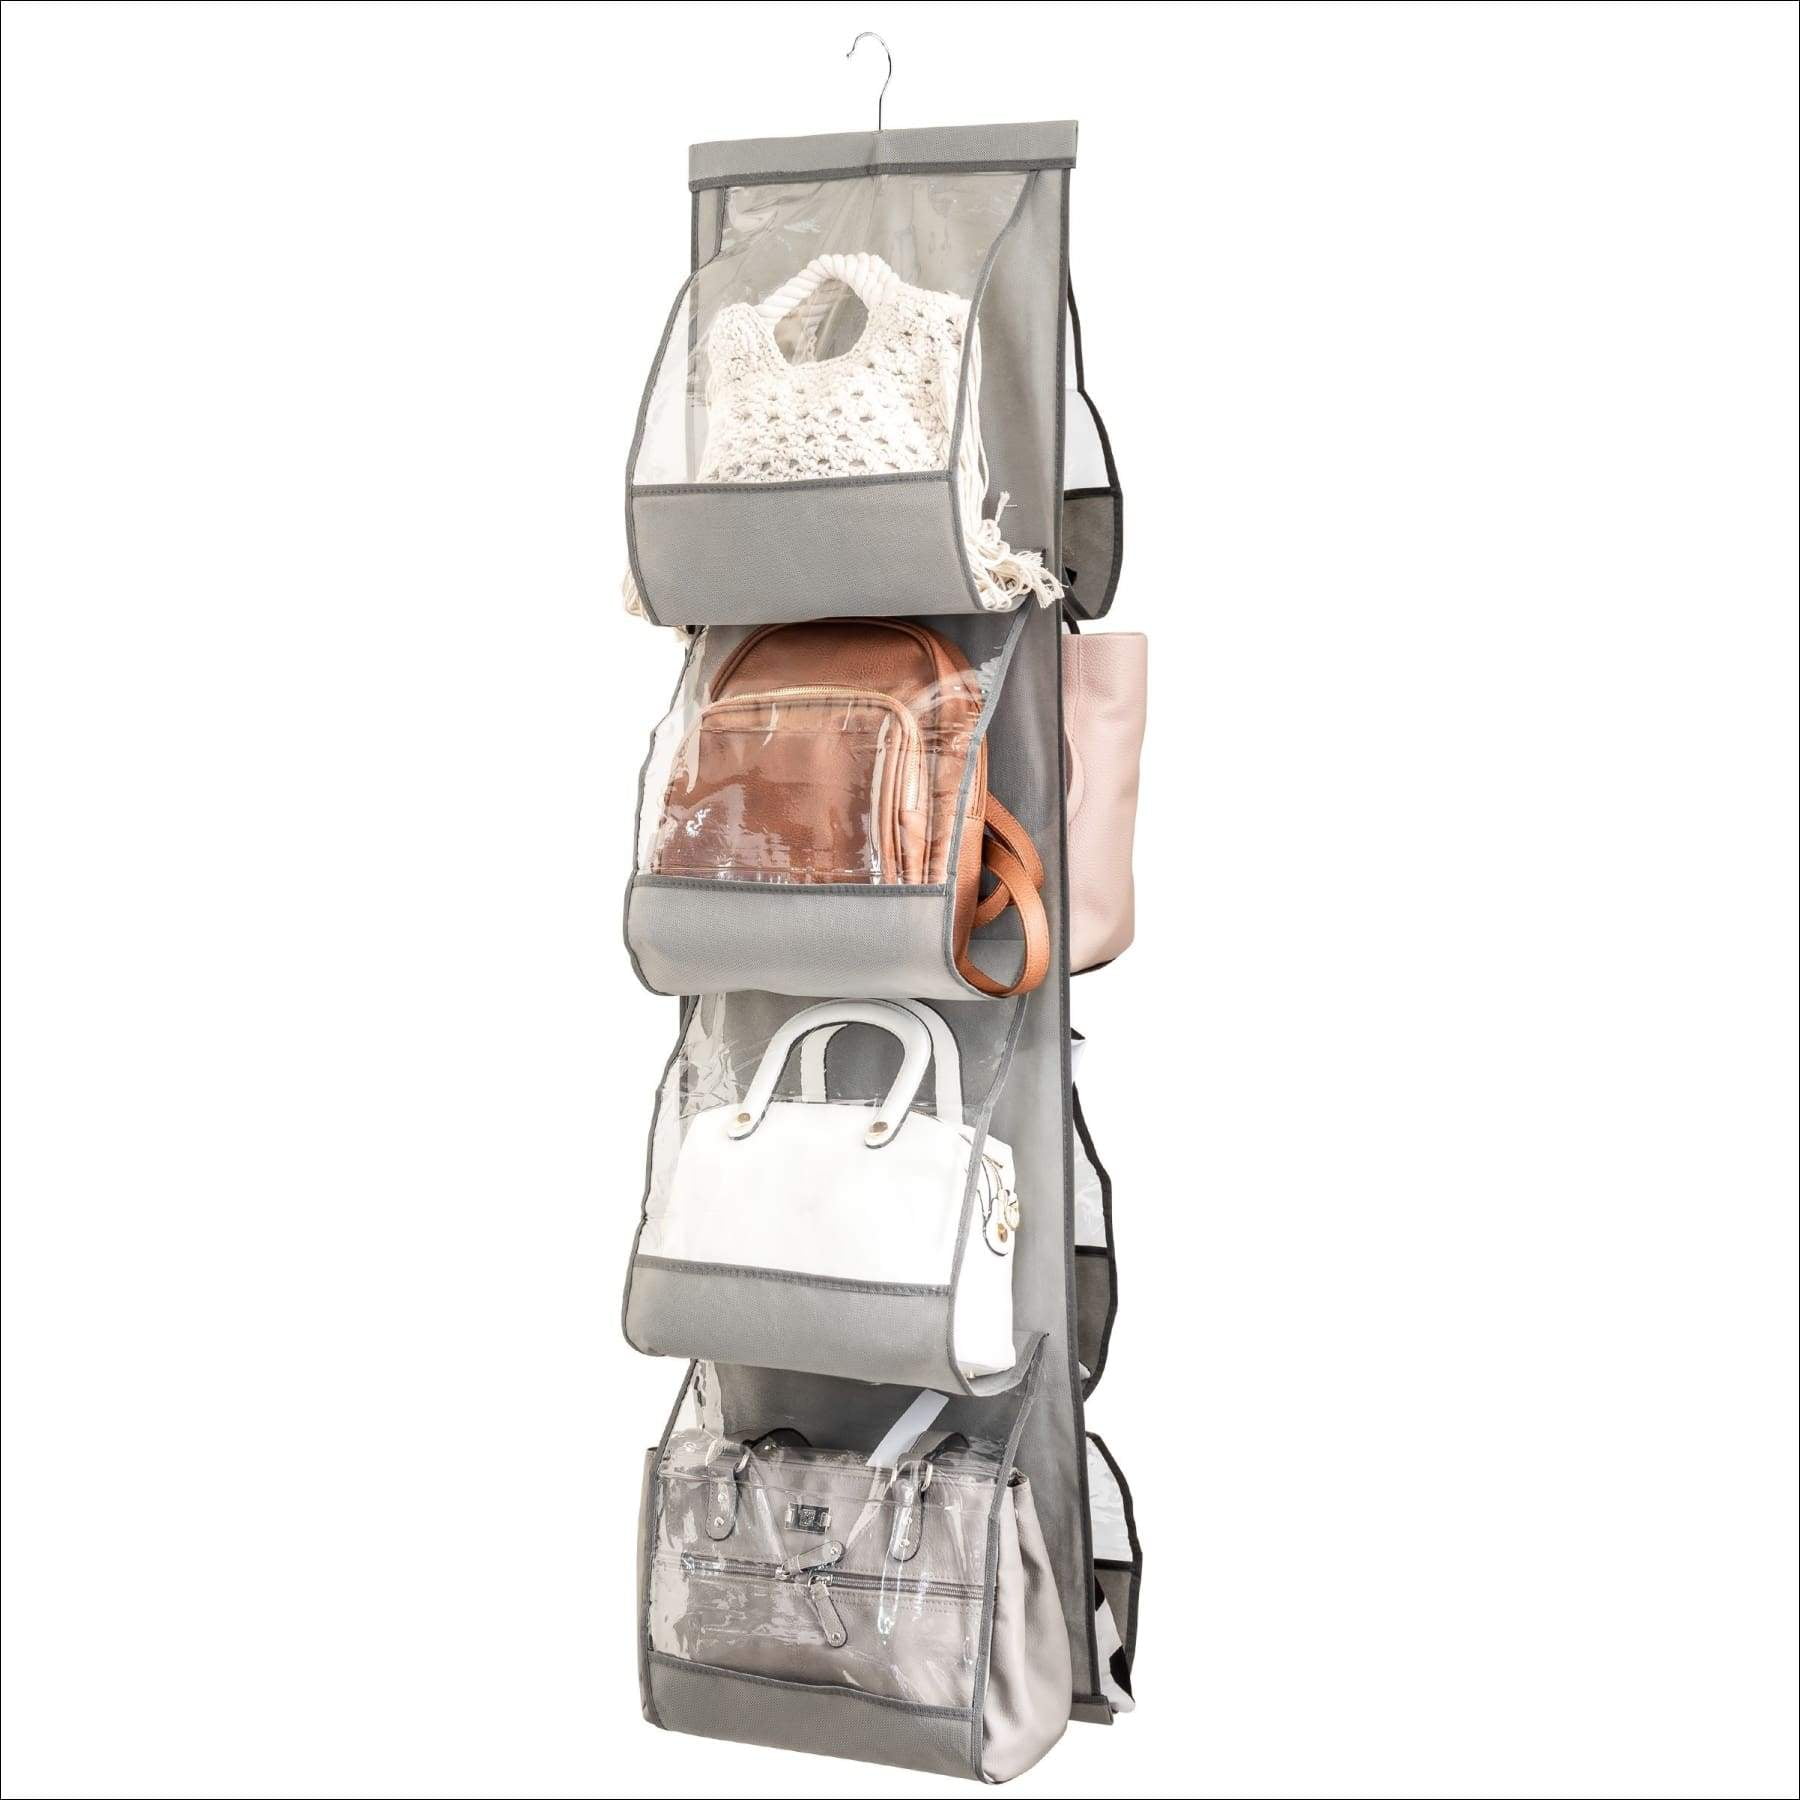 Zober Hanging Purse Organizer For Closet Clear Handbag Organizer For Purses,  Handbags Etc. 8 Easy Access Clear Vinyl Pockets With 360 Degree Swivel  Hook, Gray, 48” L x 13.8” W 48 L x 1 